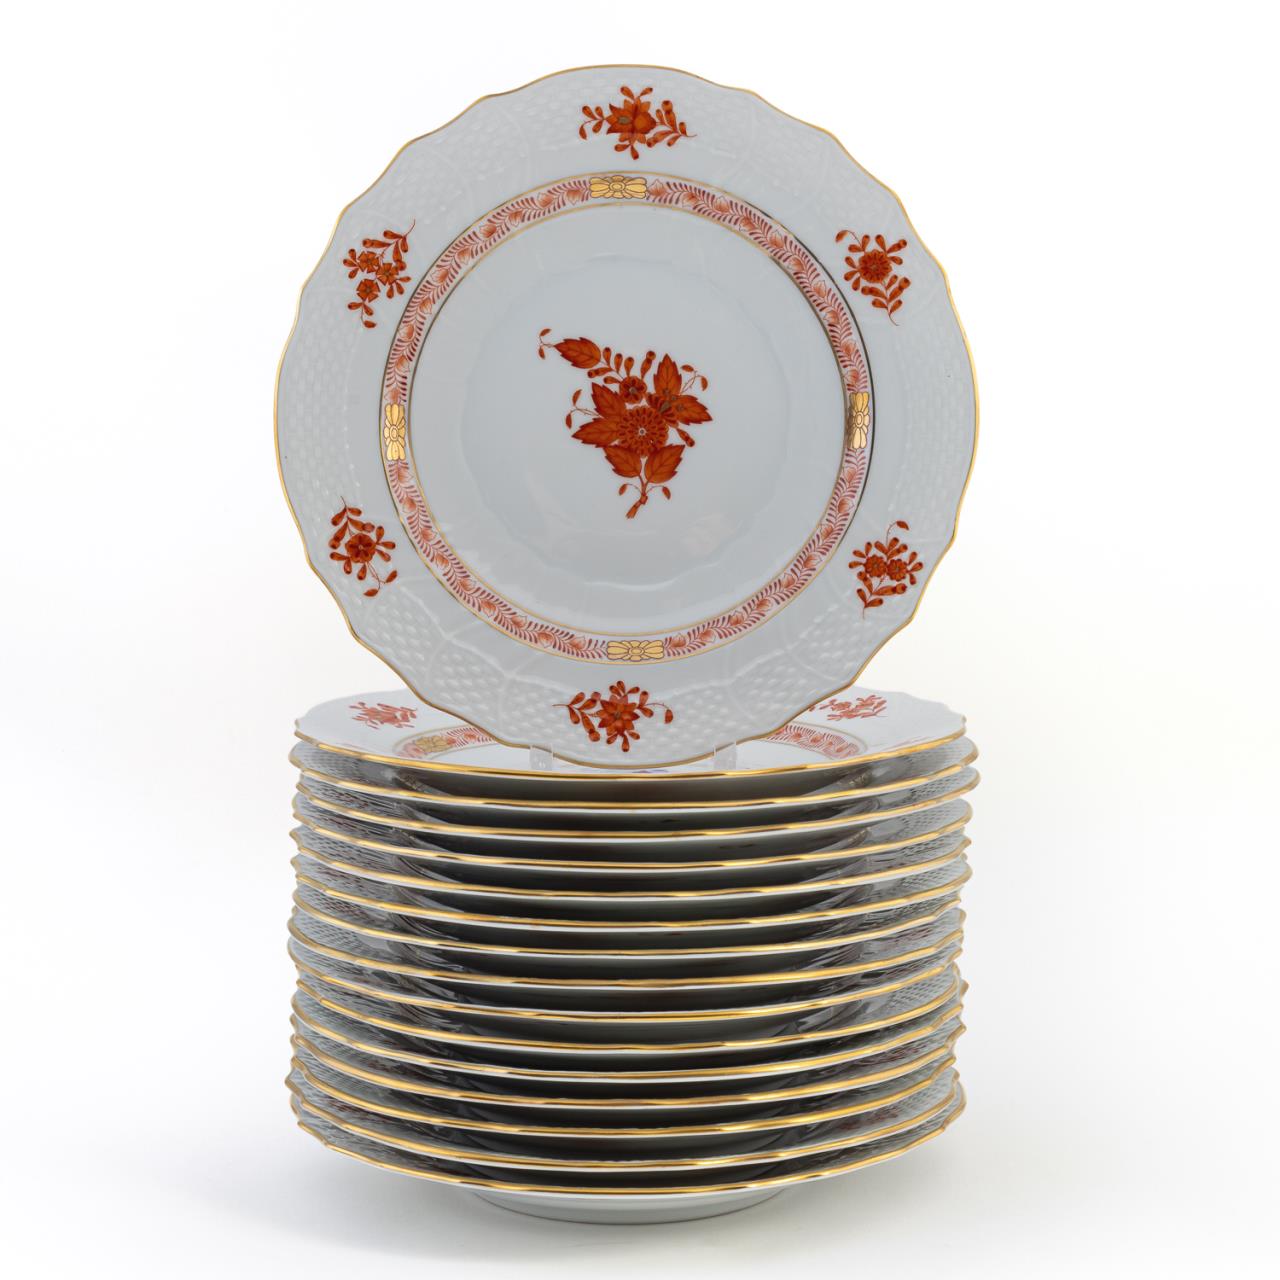 16 HEREND RUST CHINESE BOUQUET 35916c